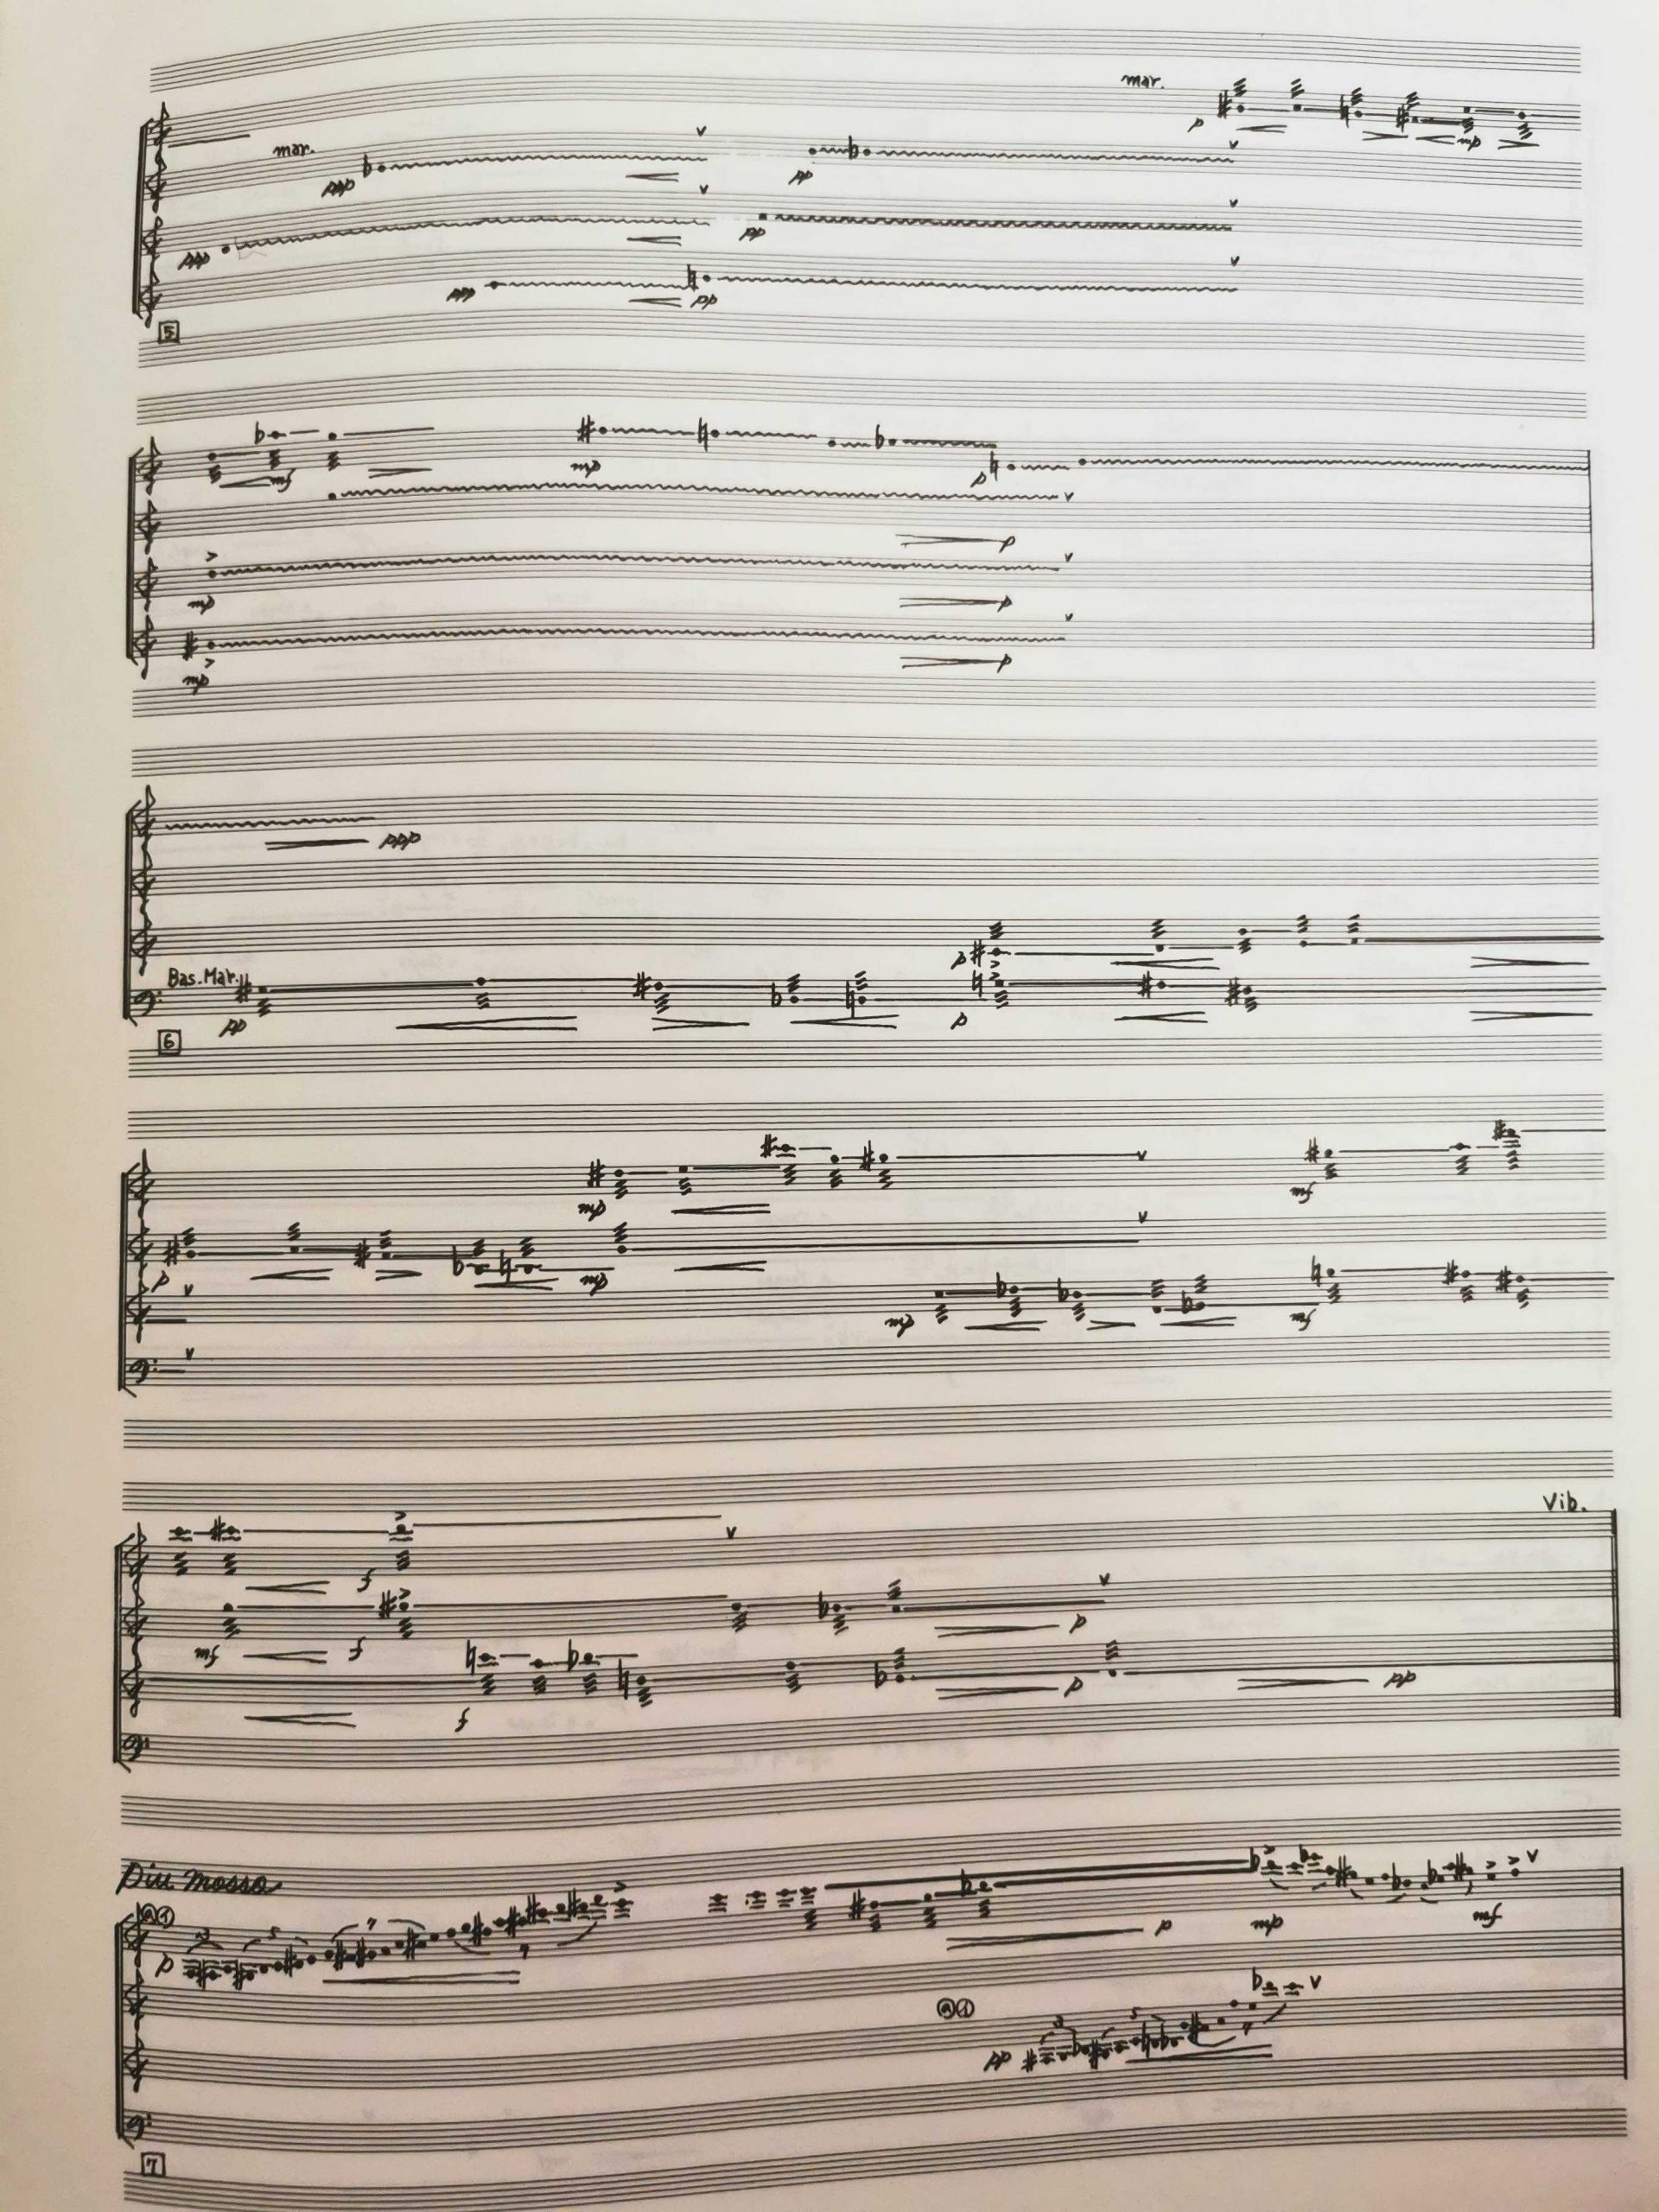 Requiem for 4 Percussionists (Score Only) by Minoru Kobashi